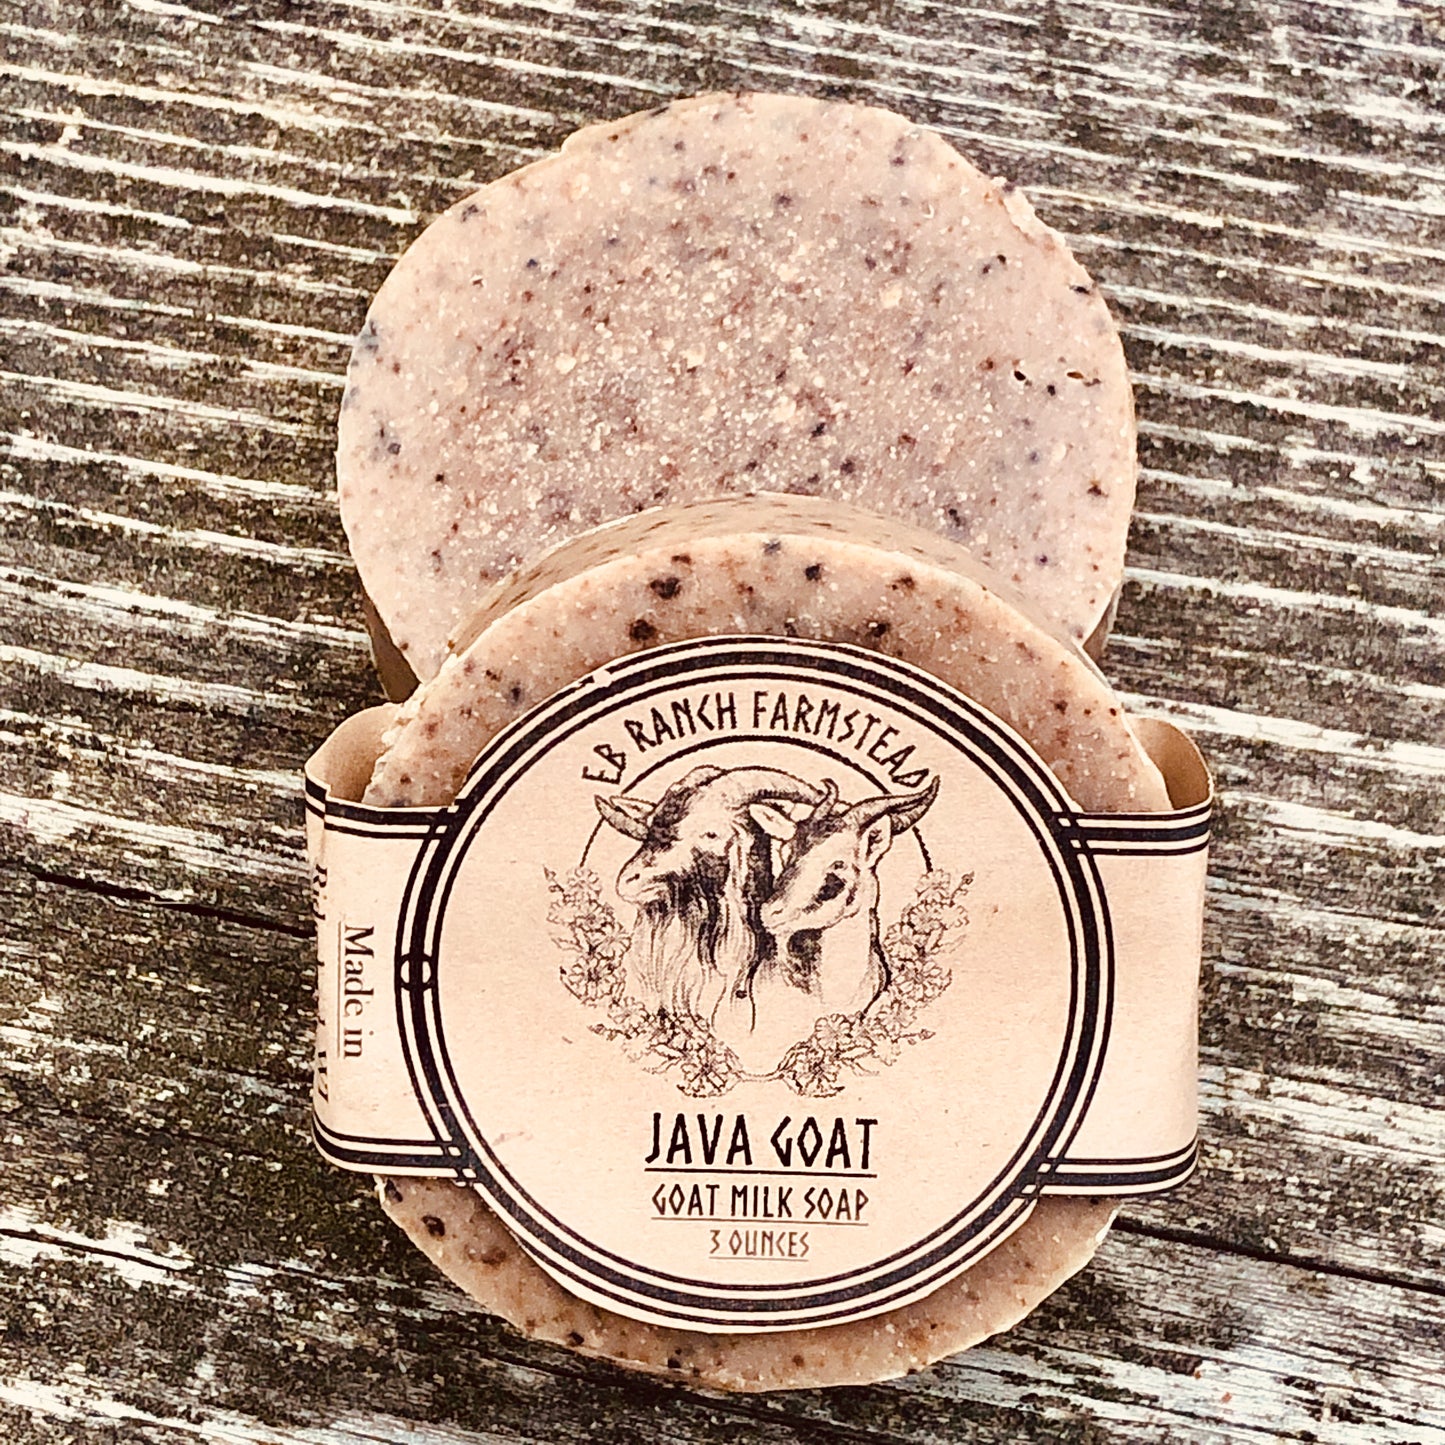 Bar of Wild Haven Farm's Java Goat goat milk soap made with San Clemente Island goat milk